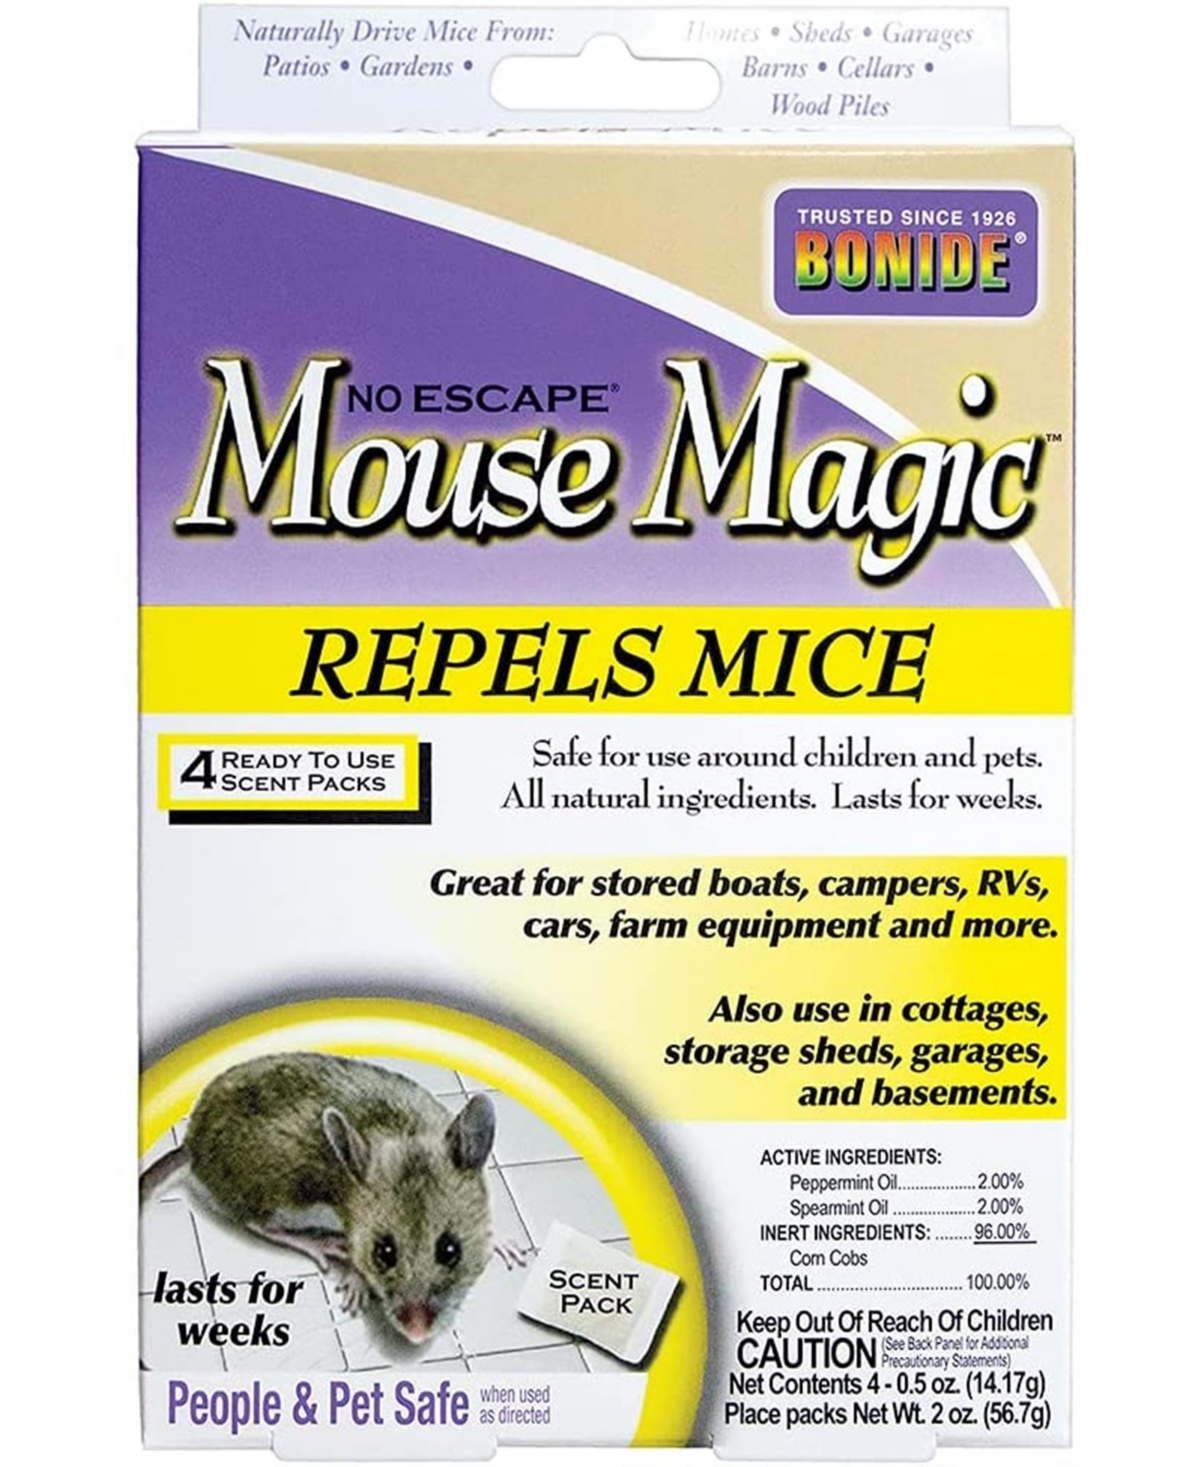 UPC 037321008651 product image for Bonide Mouse Magic Ready-to-Use Scent Packs, 4 Scent Packs | upcitemdb.com